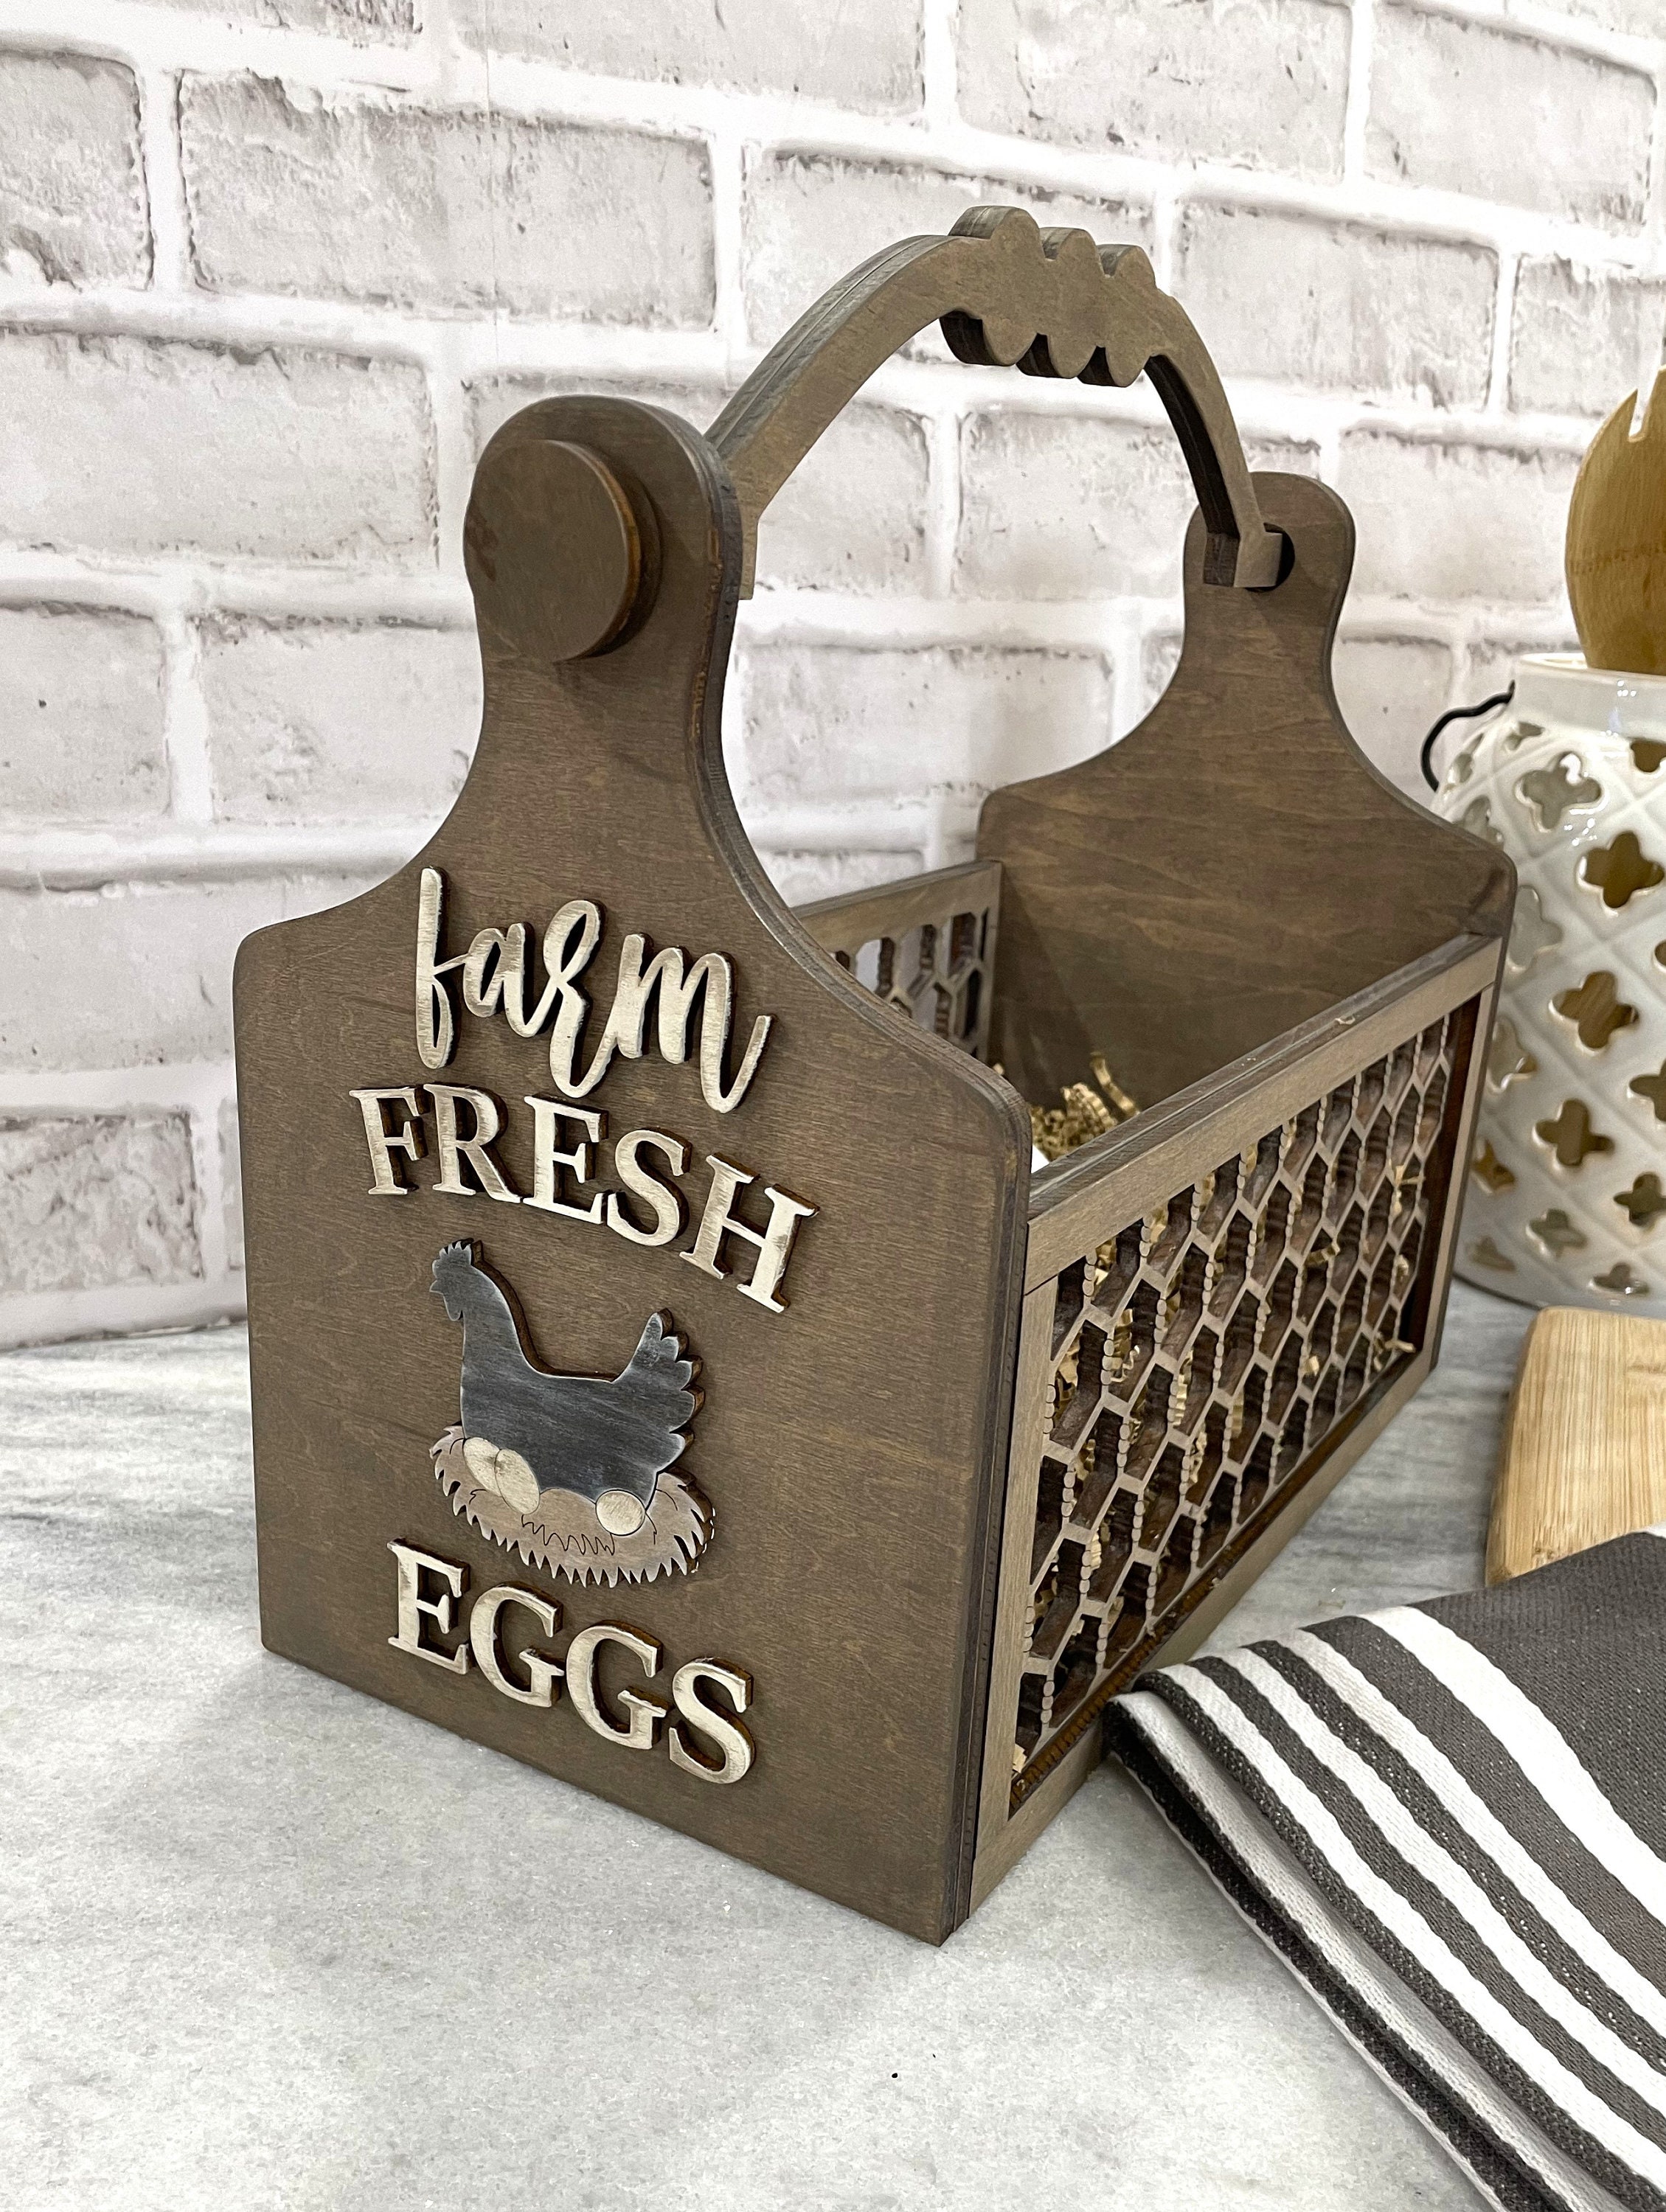 Egg Collecting Basket Round Wire Basket Farmhouse Rustic Chicken Egg Holder